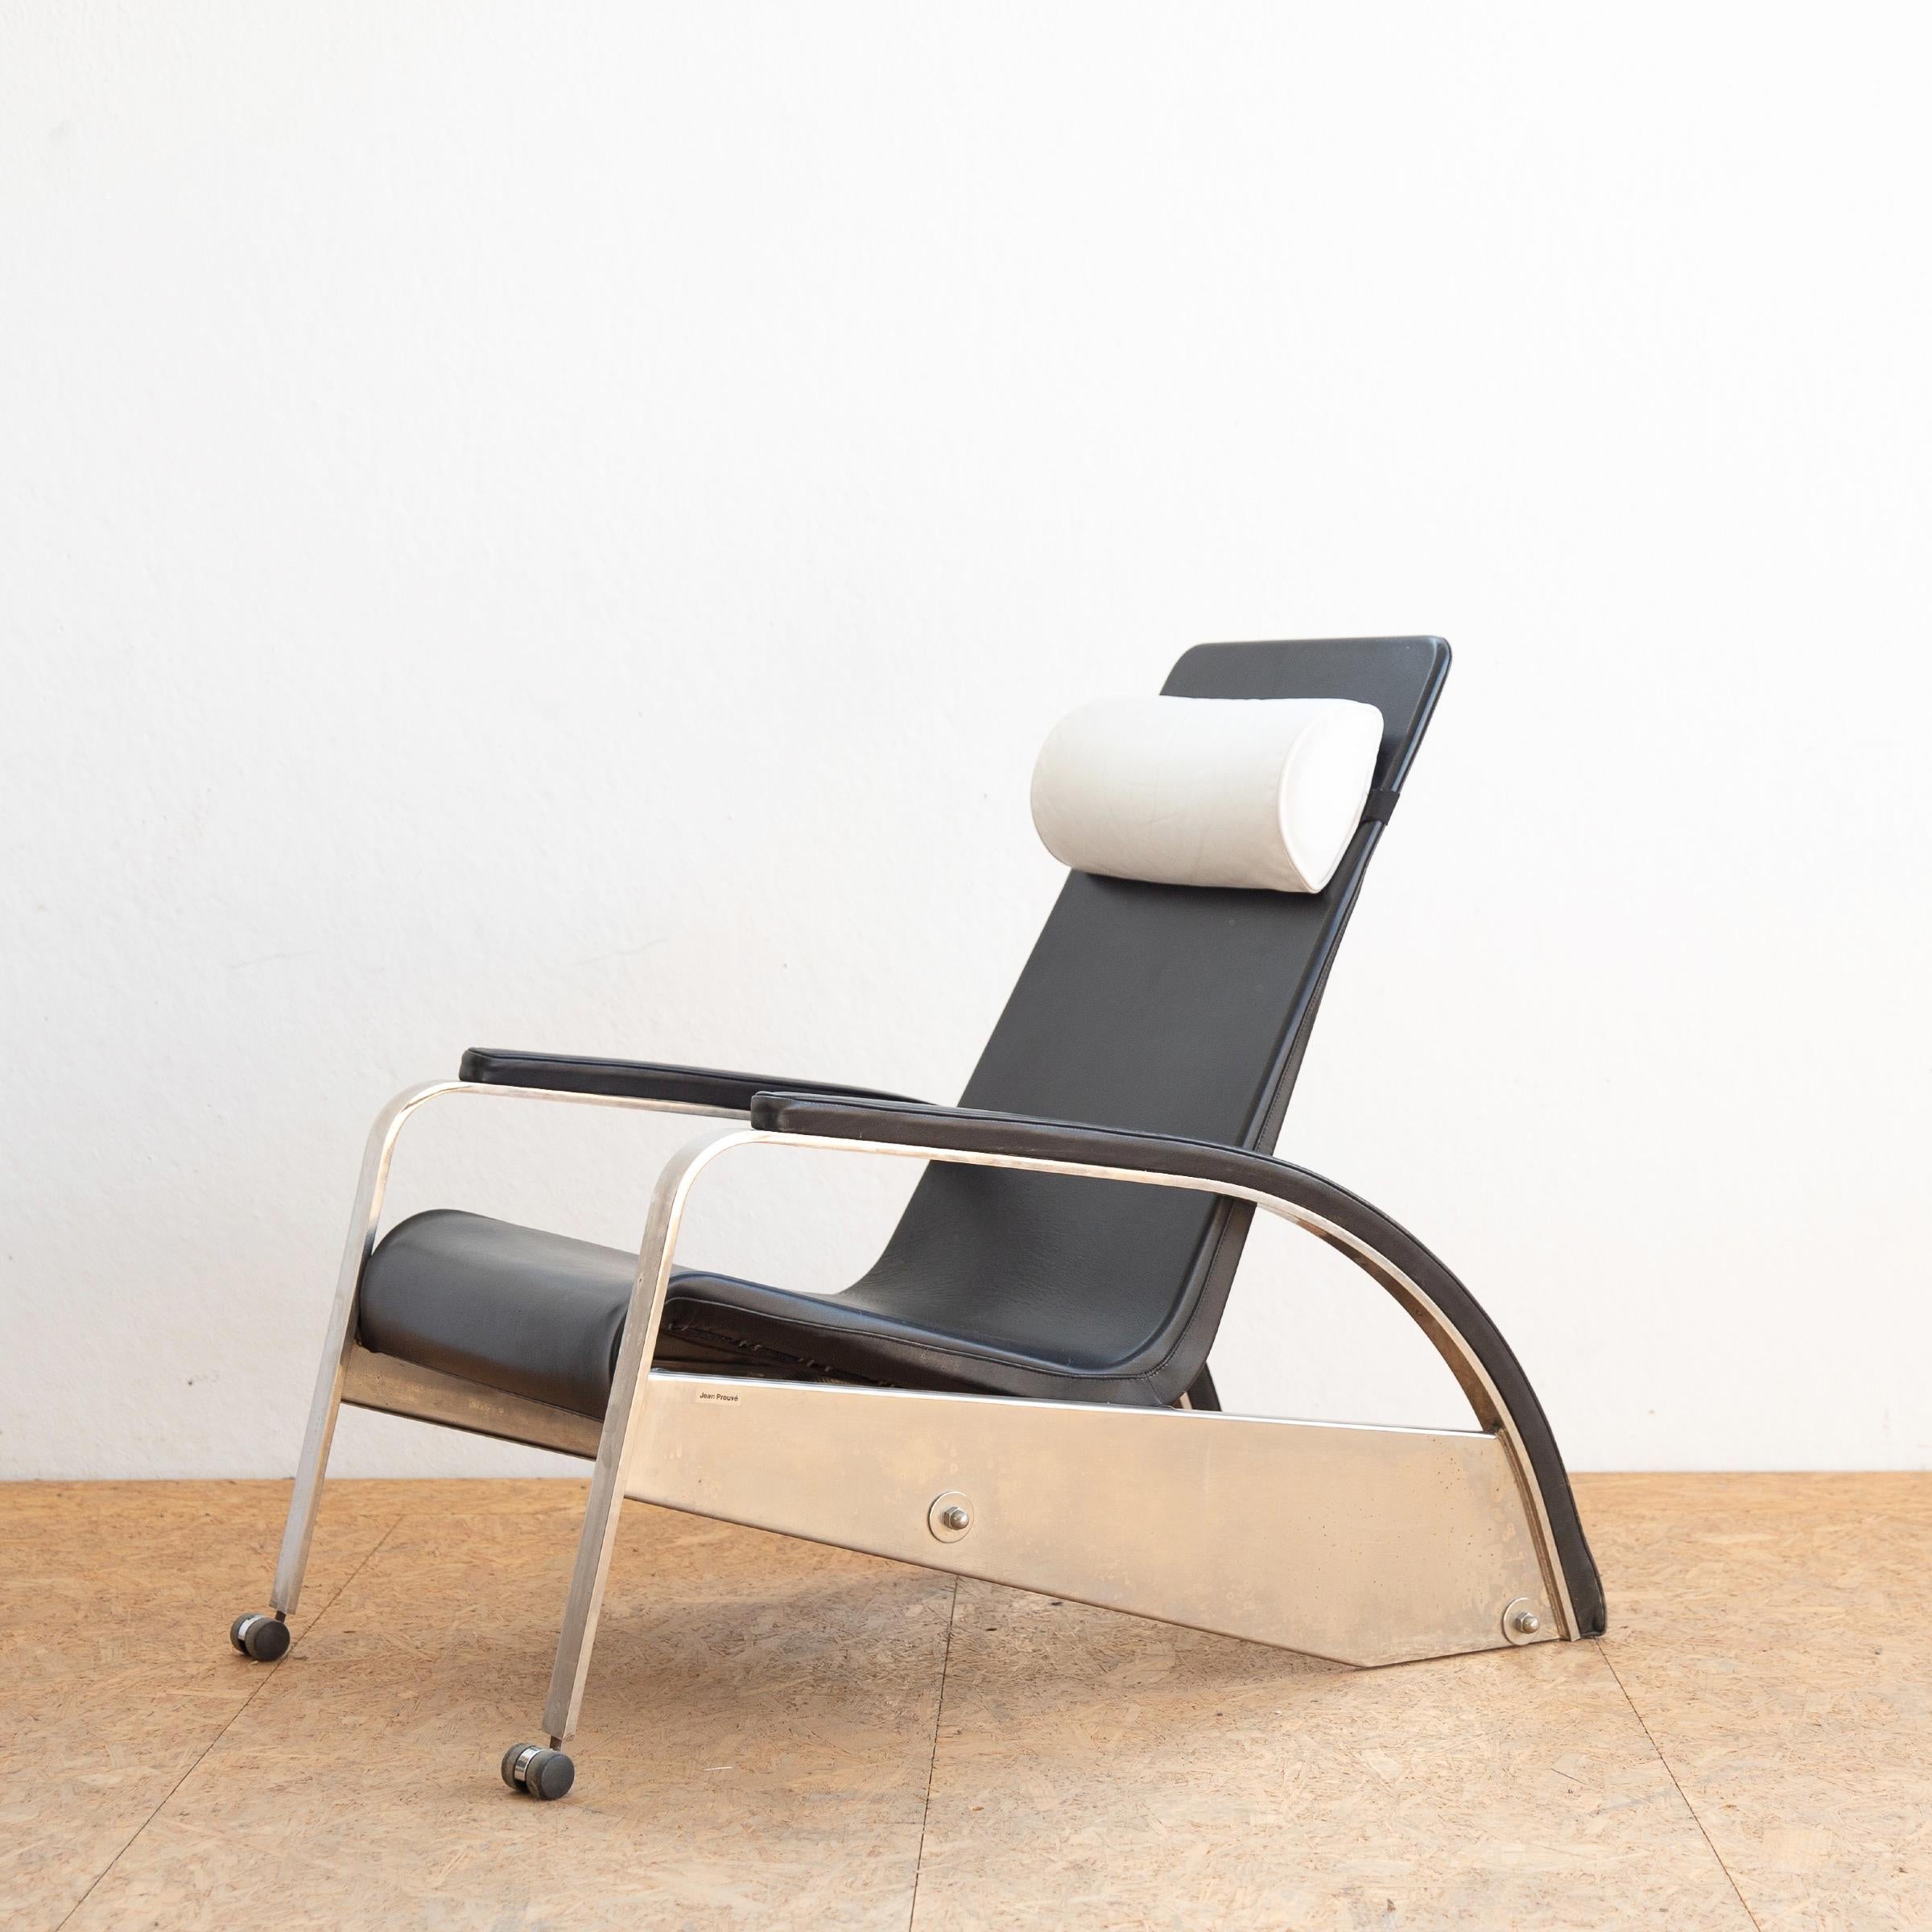 Late 20th Century Grand Repos Lounge Chair Jean Prouvé Black Leather Reclining Edited by Tecta